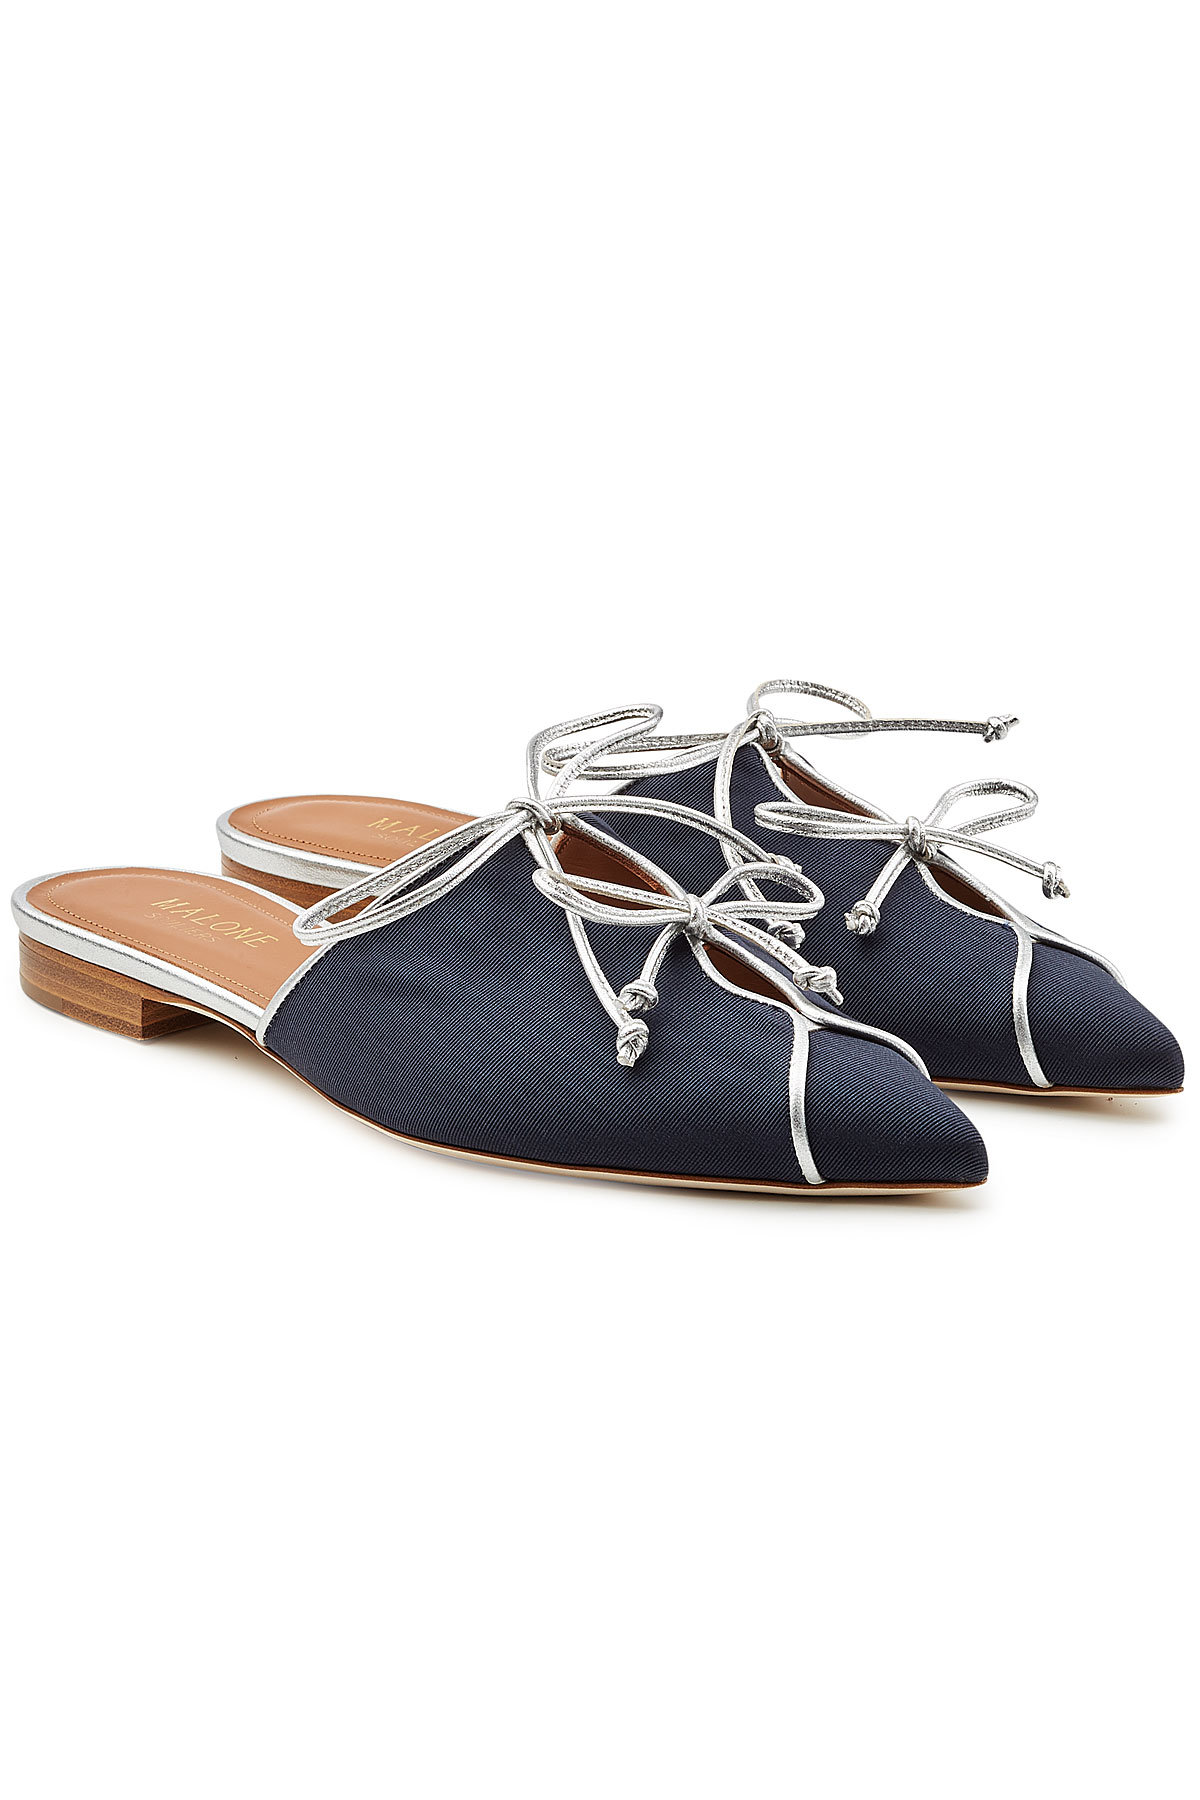 Malone Souliers - Vilvin Mules with Leather